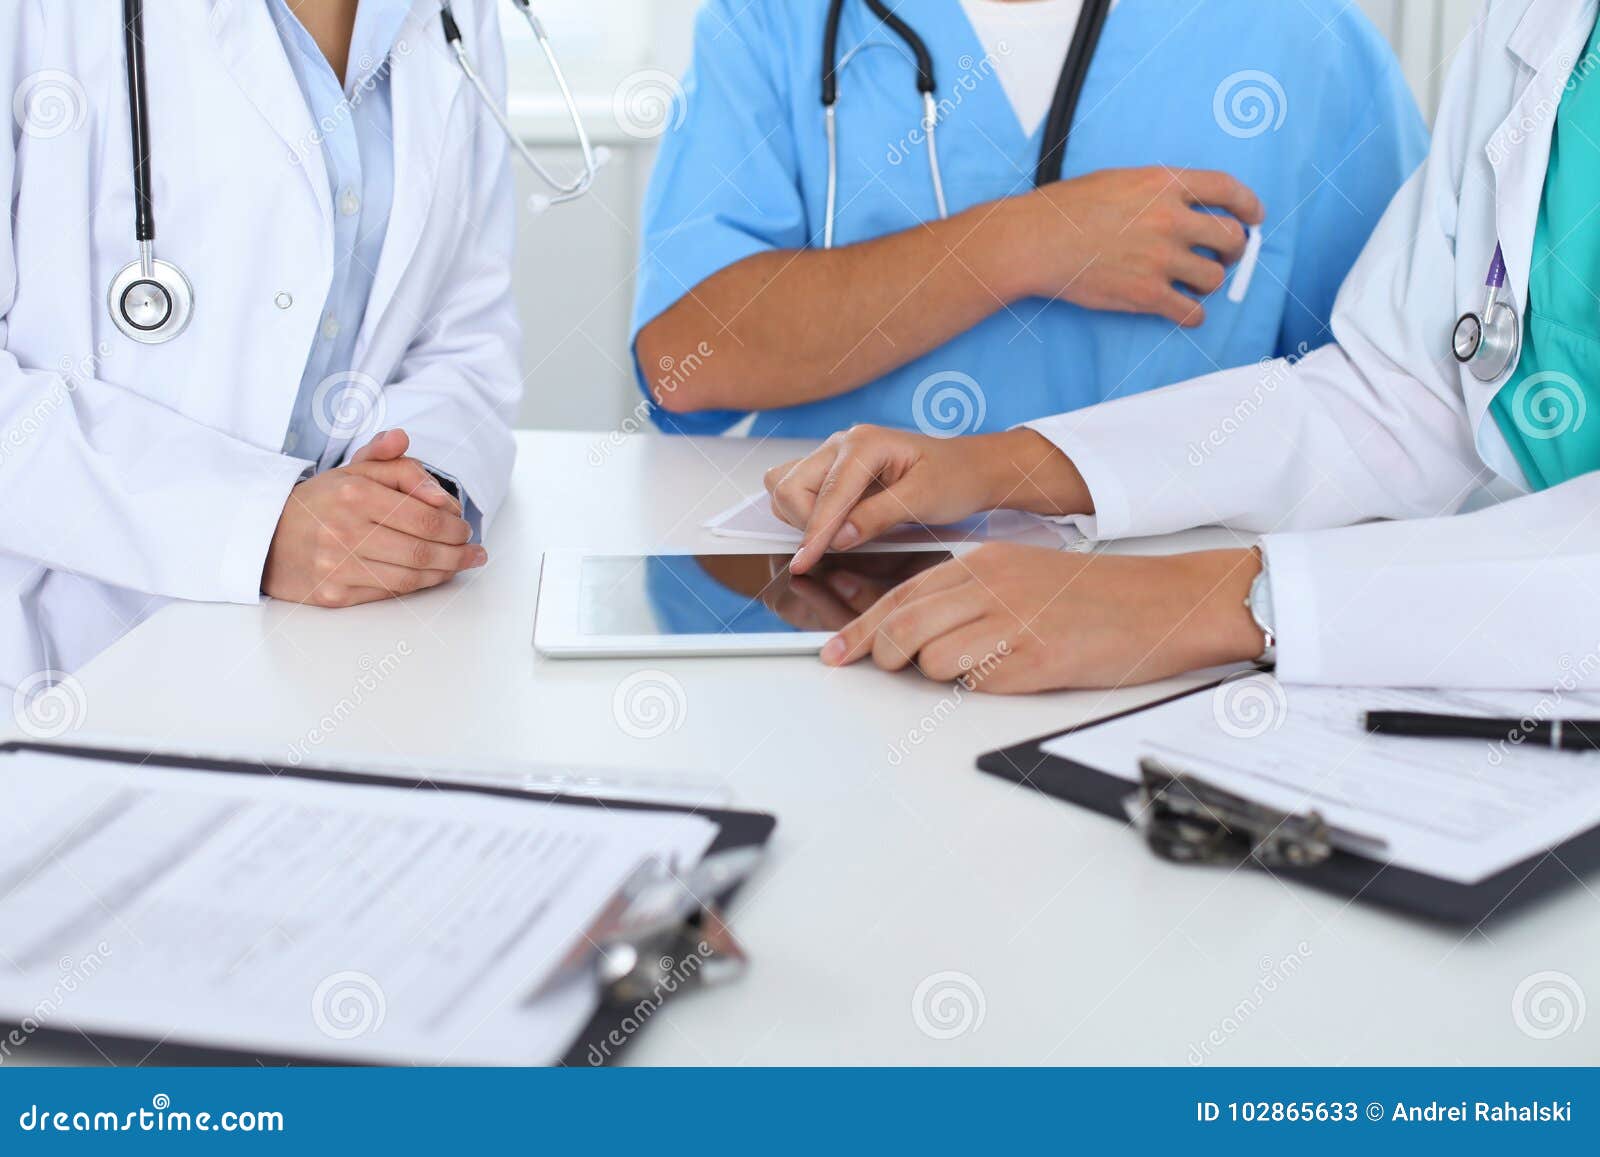 group of doctors at medical meeting. close up of physician using touch pad or tablet computer